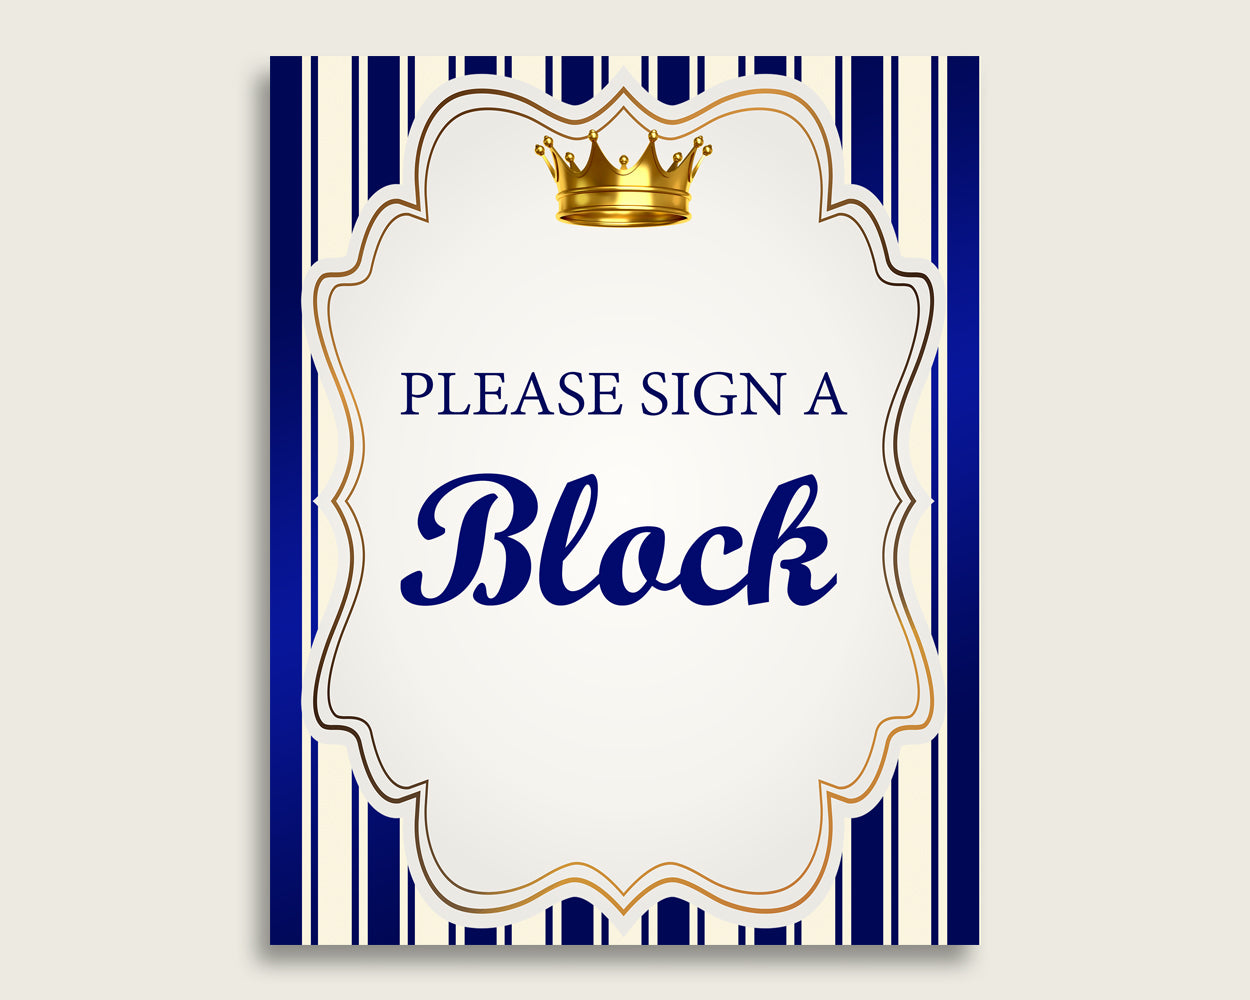 Blue Gold Please Sign A Block Sign and Decoarate A Block Sign Printables, Royal Prince Boy Baby Shower Decor, Instant Download, rp001